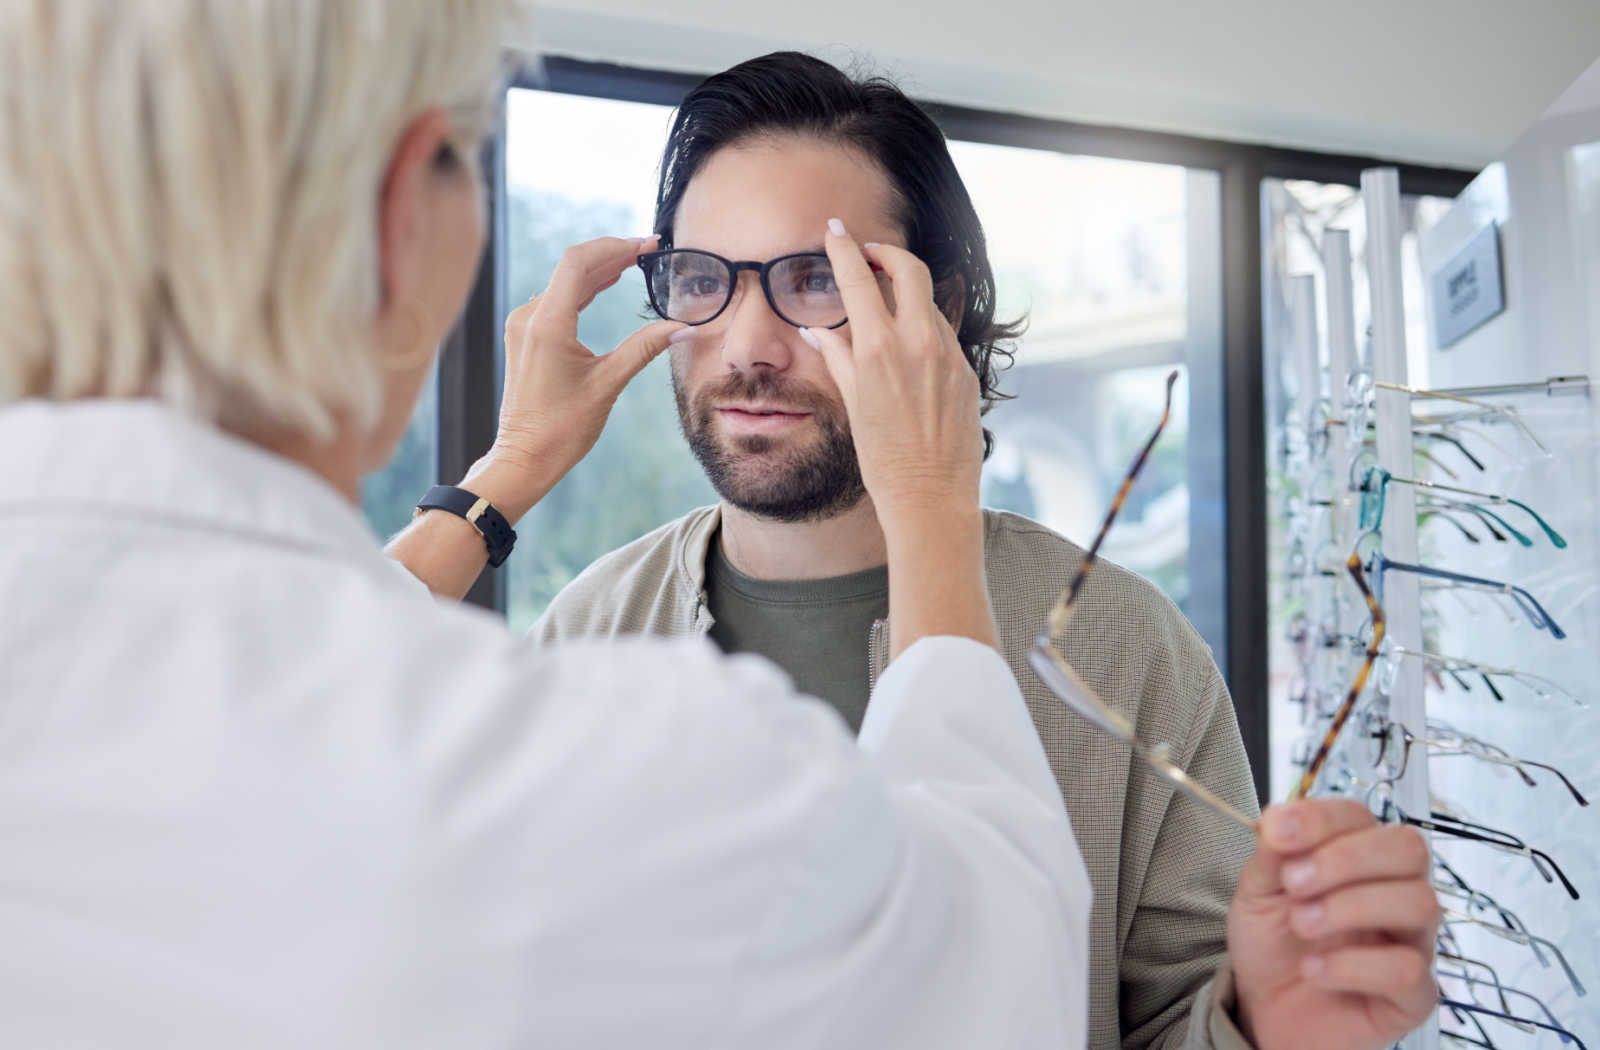 A man trying on glasses at an optic store while being assisted by an optometrist.